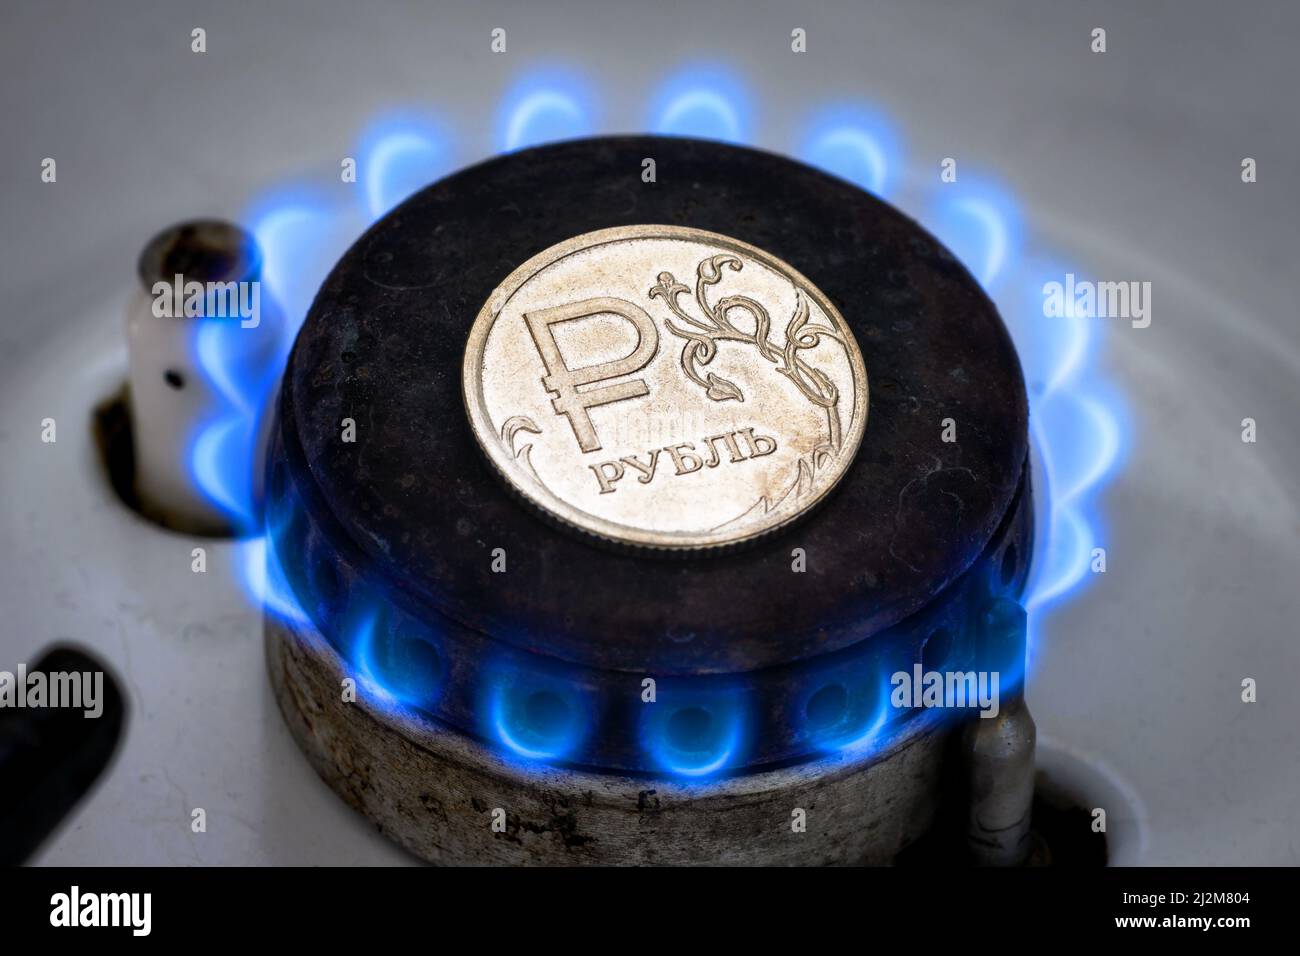 Gas burner and ruble coin, Russian money on home gas stove. Natural propane gas flame and ruble currency. Concept of Russia and Europe economy, gas co Stock Photo